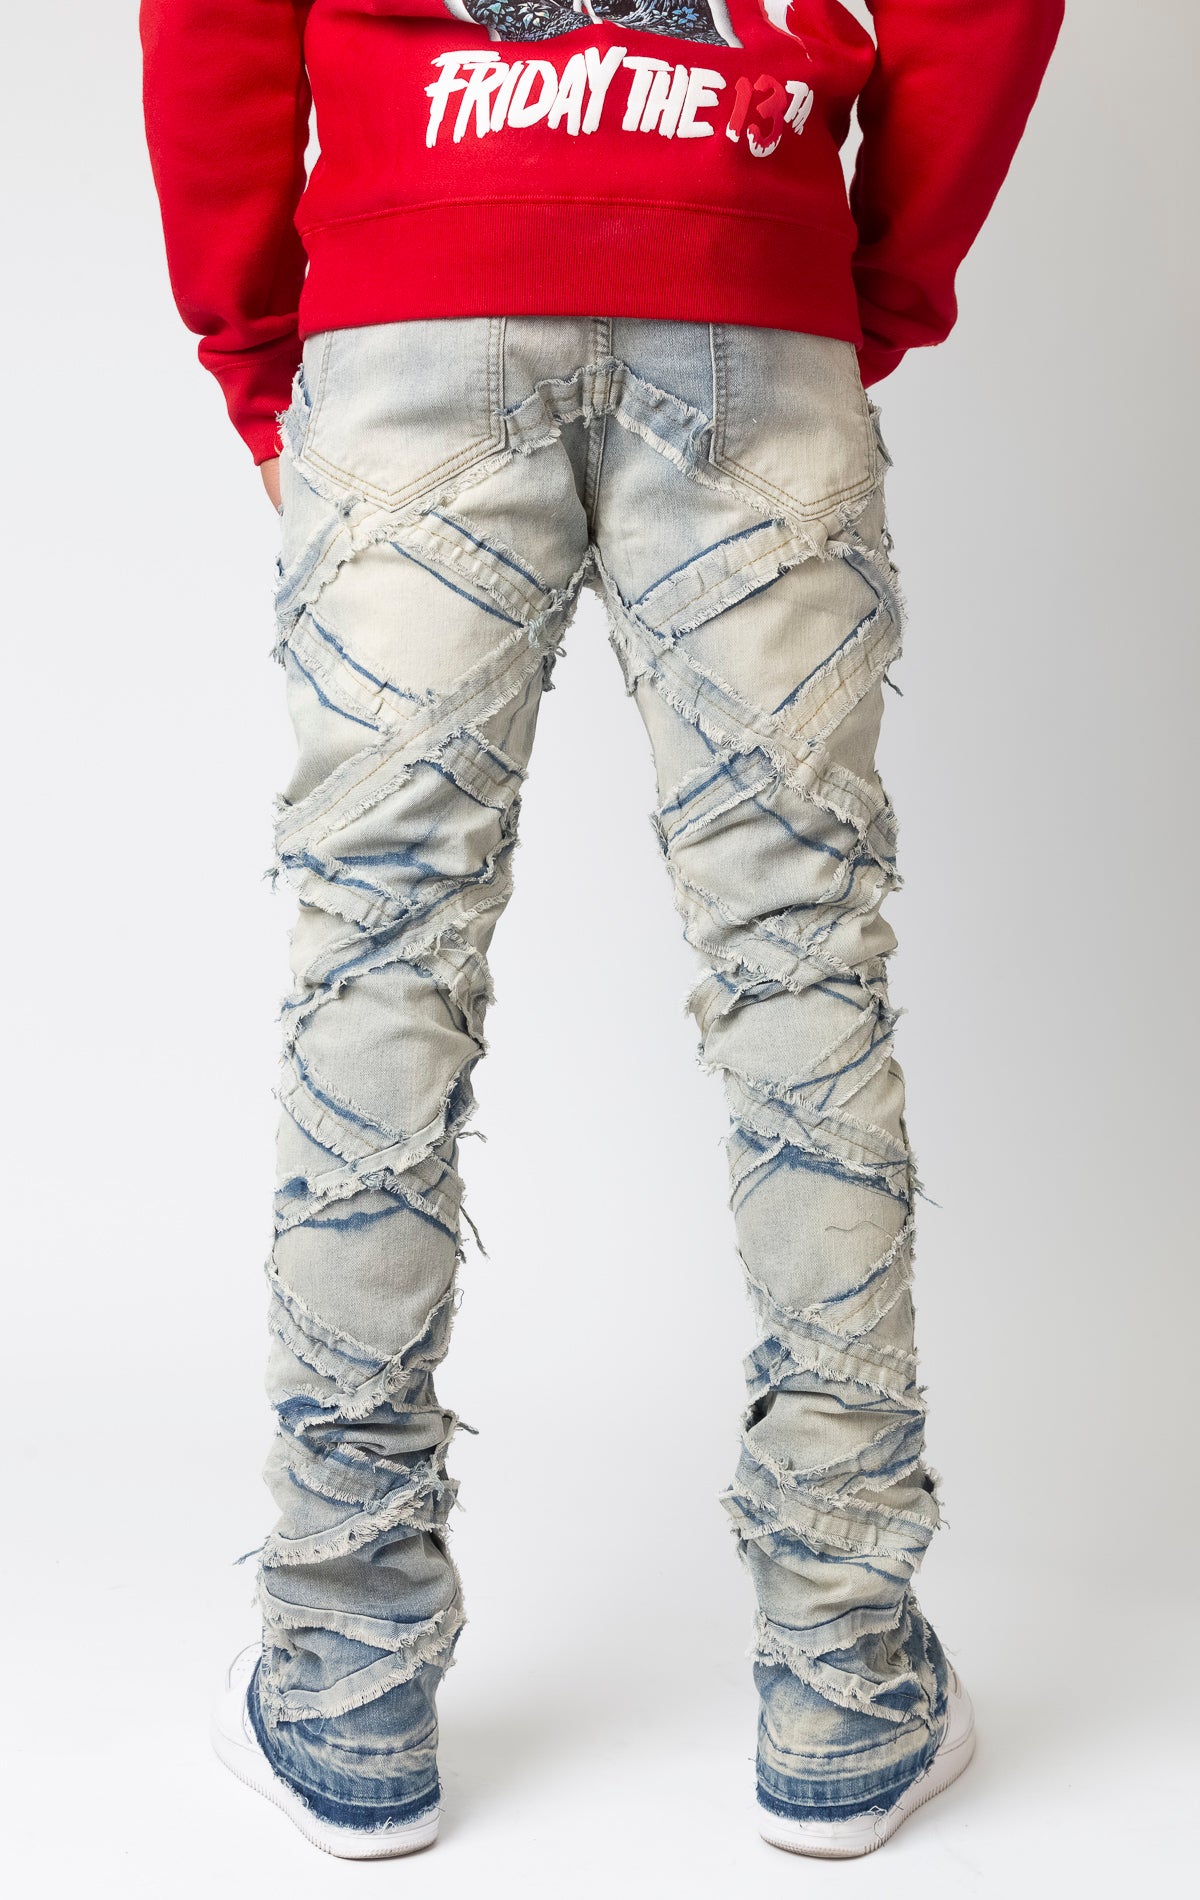 Antique bleach Distressed stacked jeans with a cut and sew panel construction, frayed detailing, and stretch fabric.